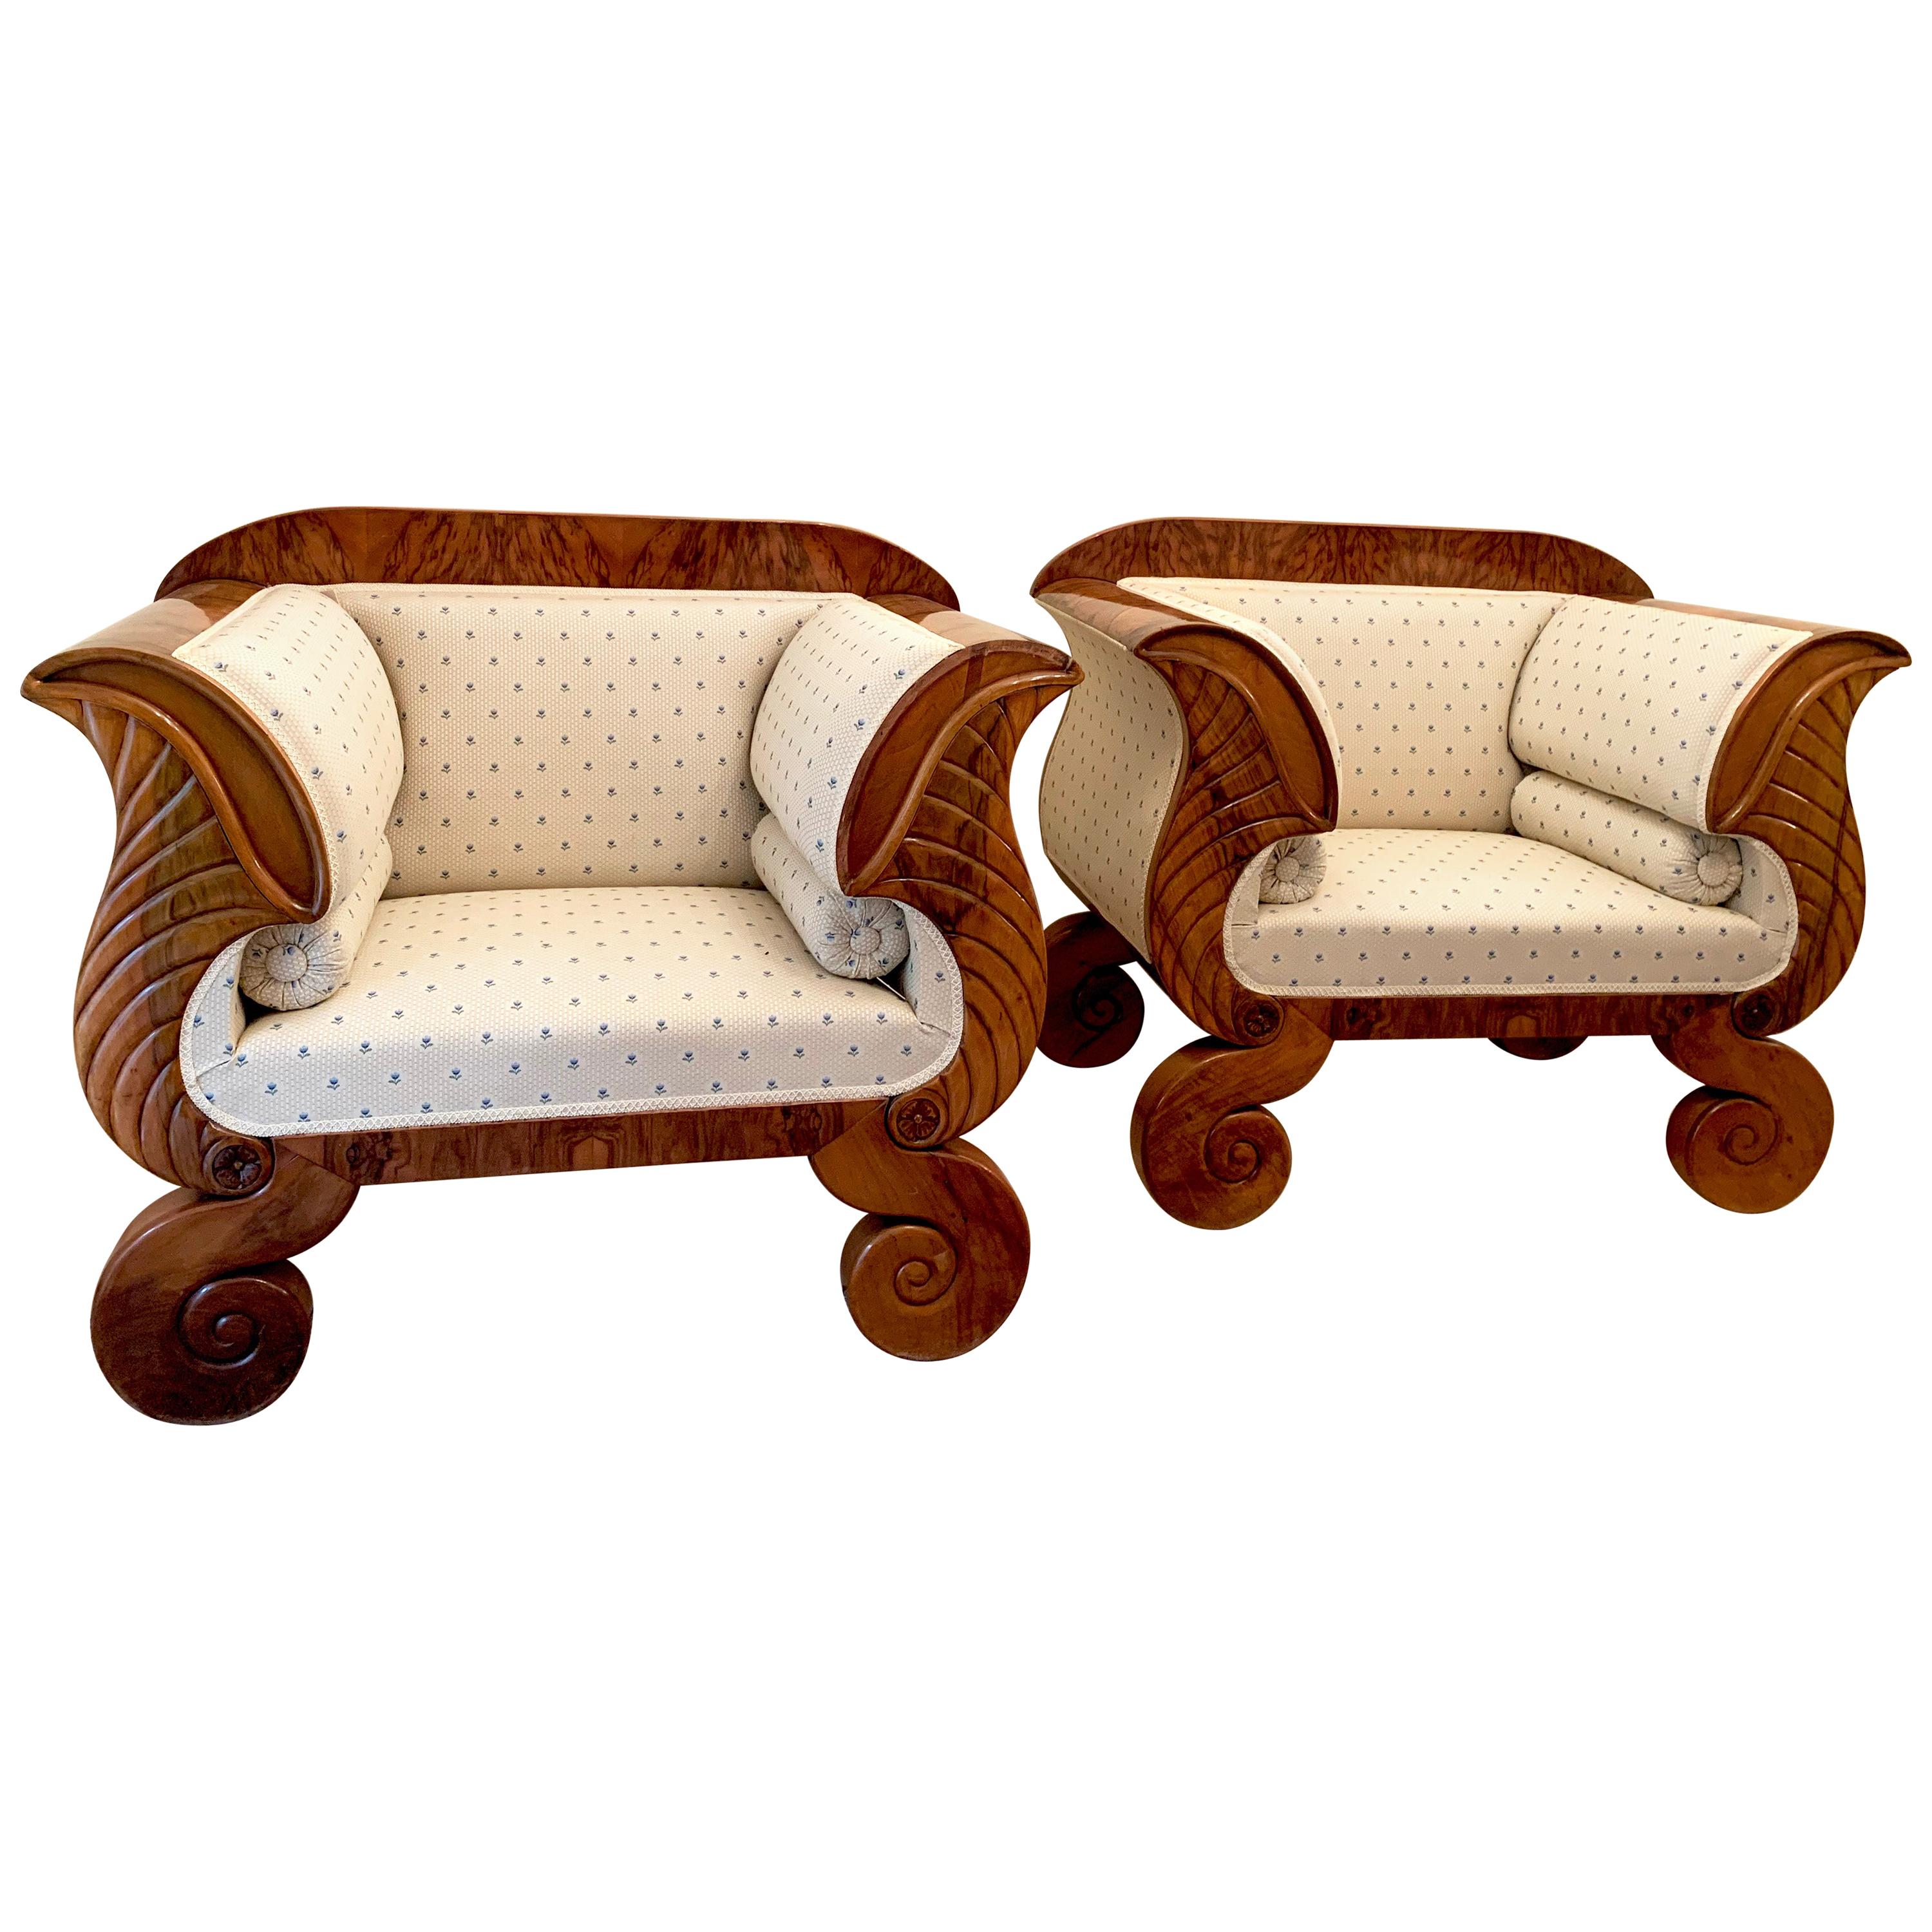 Two Large Biedermeier Armchairs Walnut Cream Material with Blue Flowers